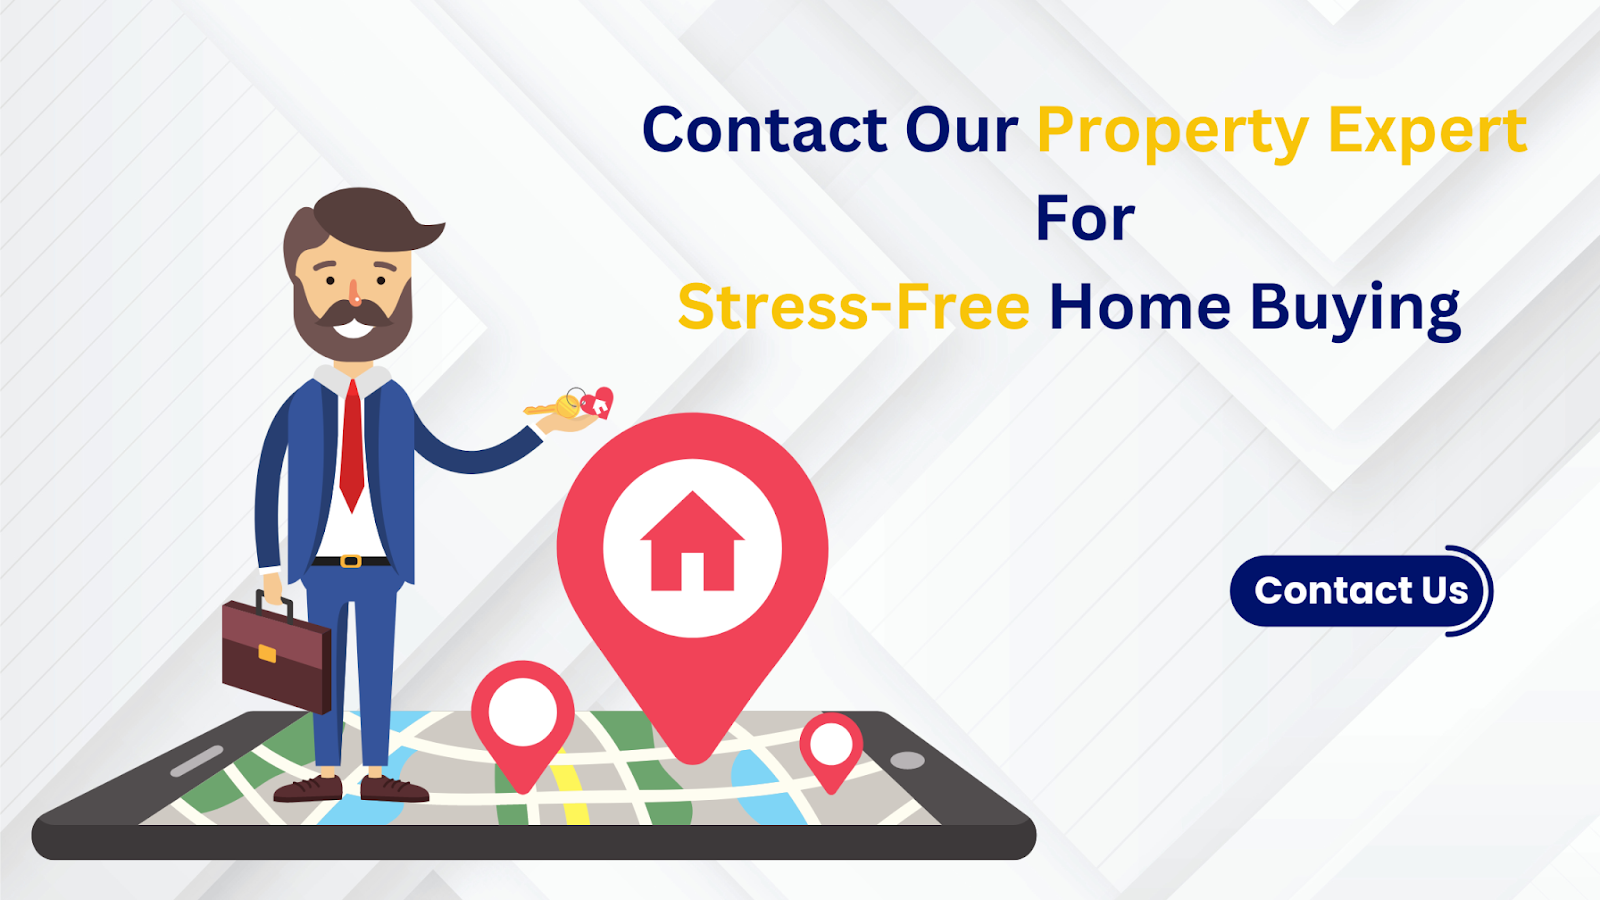 Contact PropertyCloud expert for guidance in an easy way related to home buying.